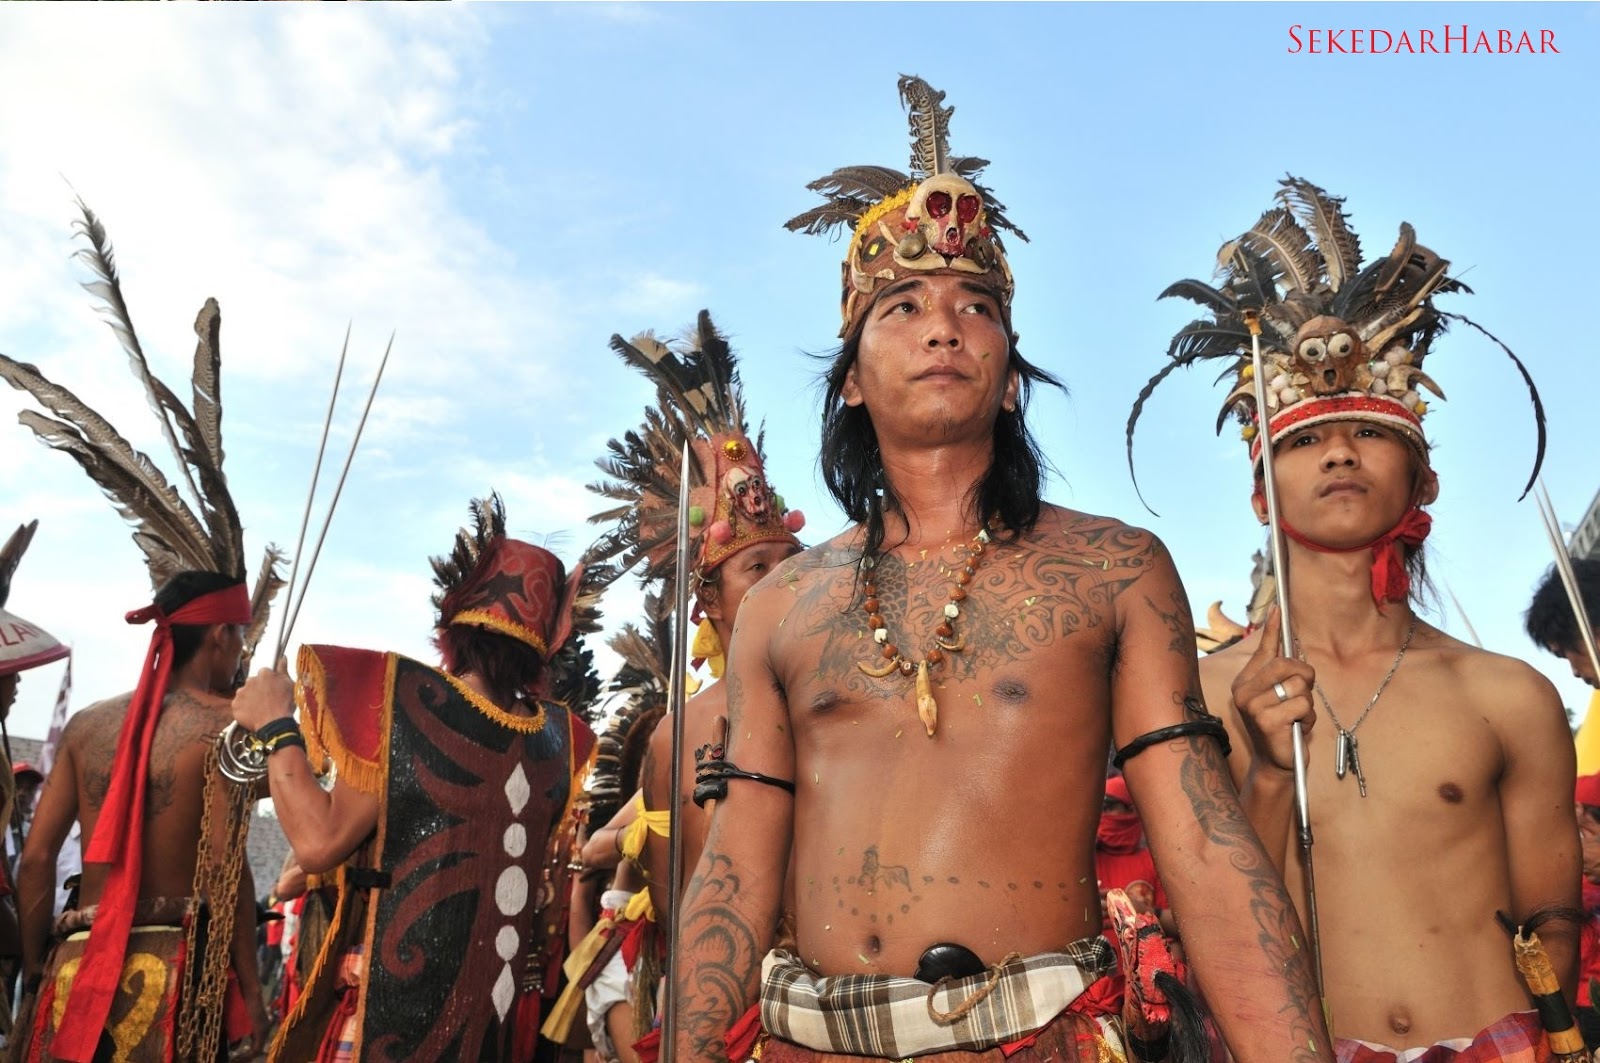  Dayak  Tribe  In Kalimantan Indonesia Do you guys want a 